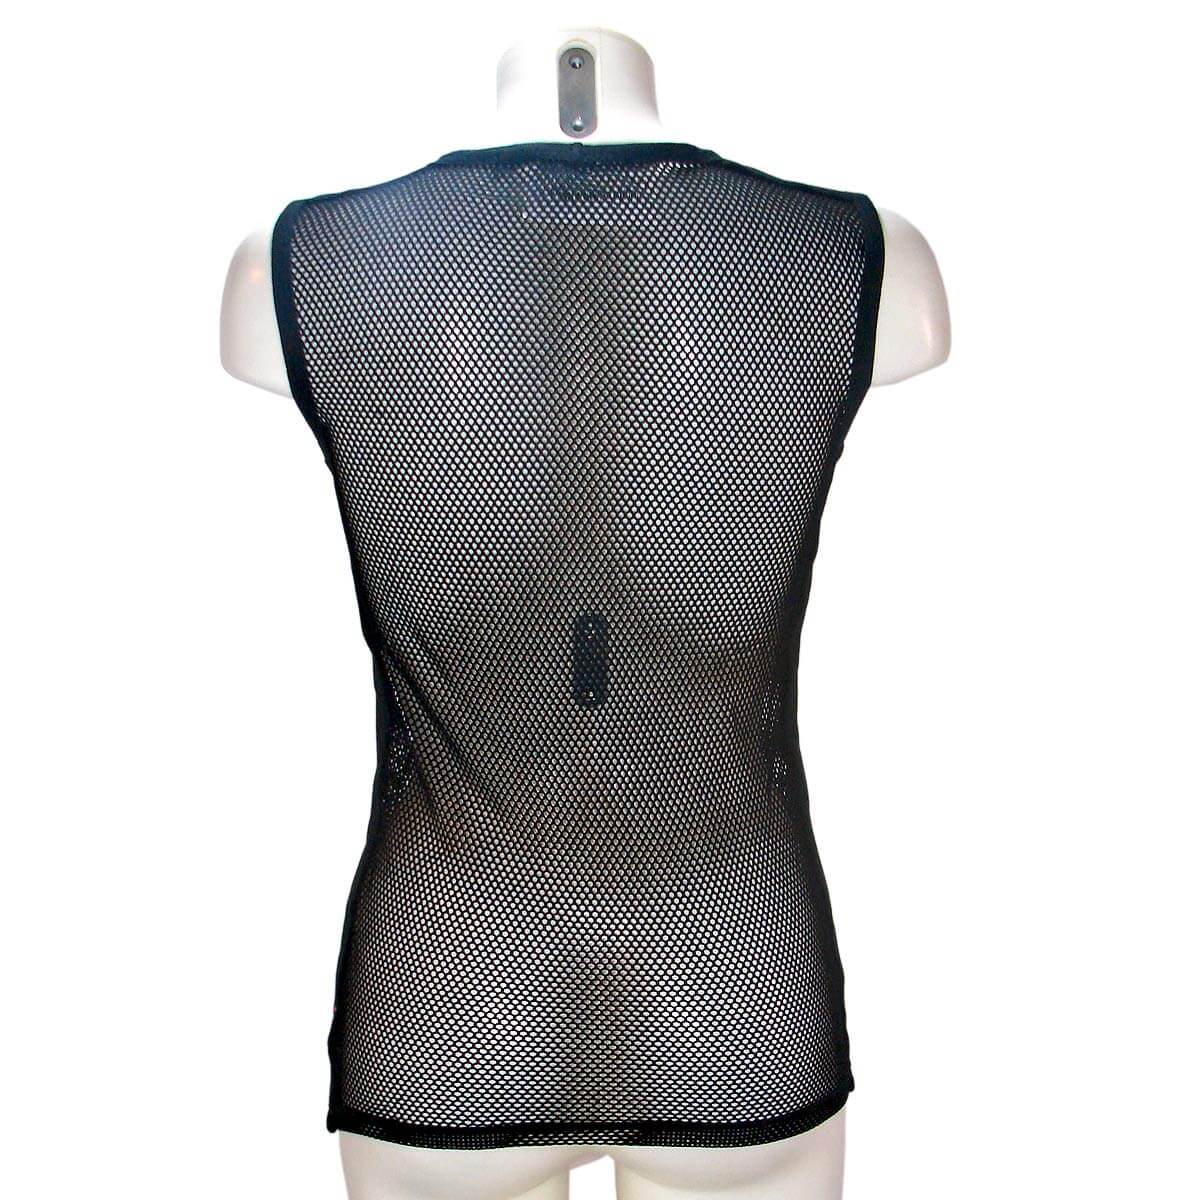 Unisex fishnet shirt with X and O-ring By Lip ServiceAnother Way of Life